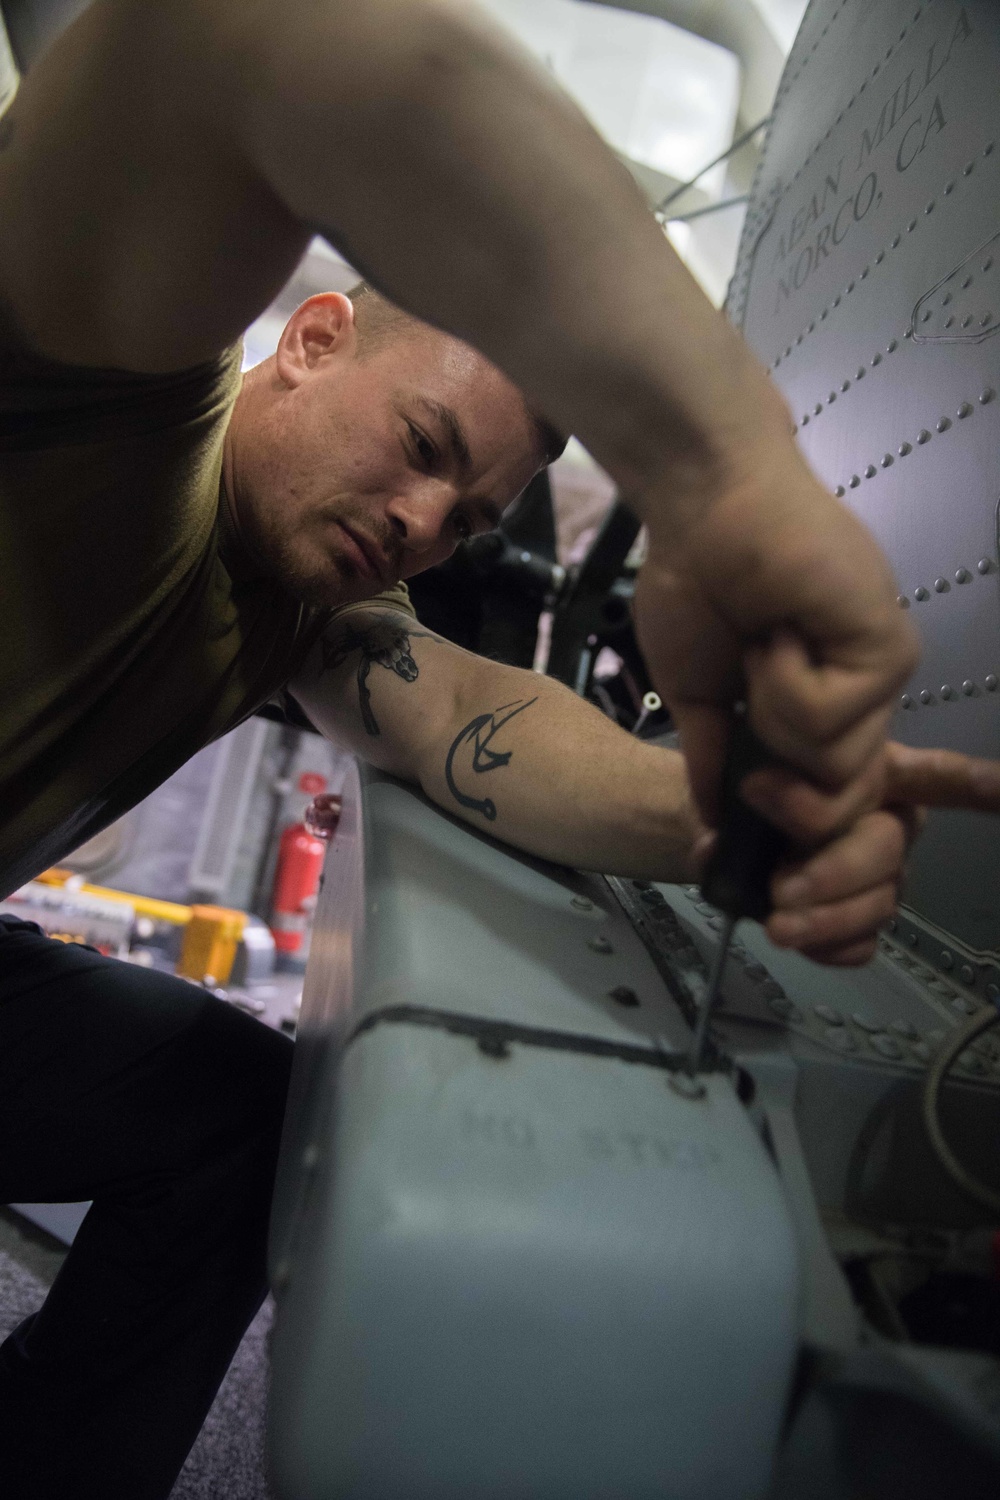 Milledgeville Native works on MH-60R Sea Hawk Helicopter